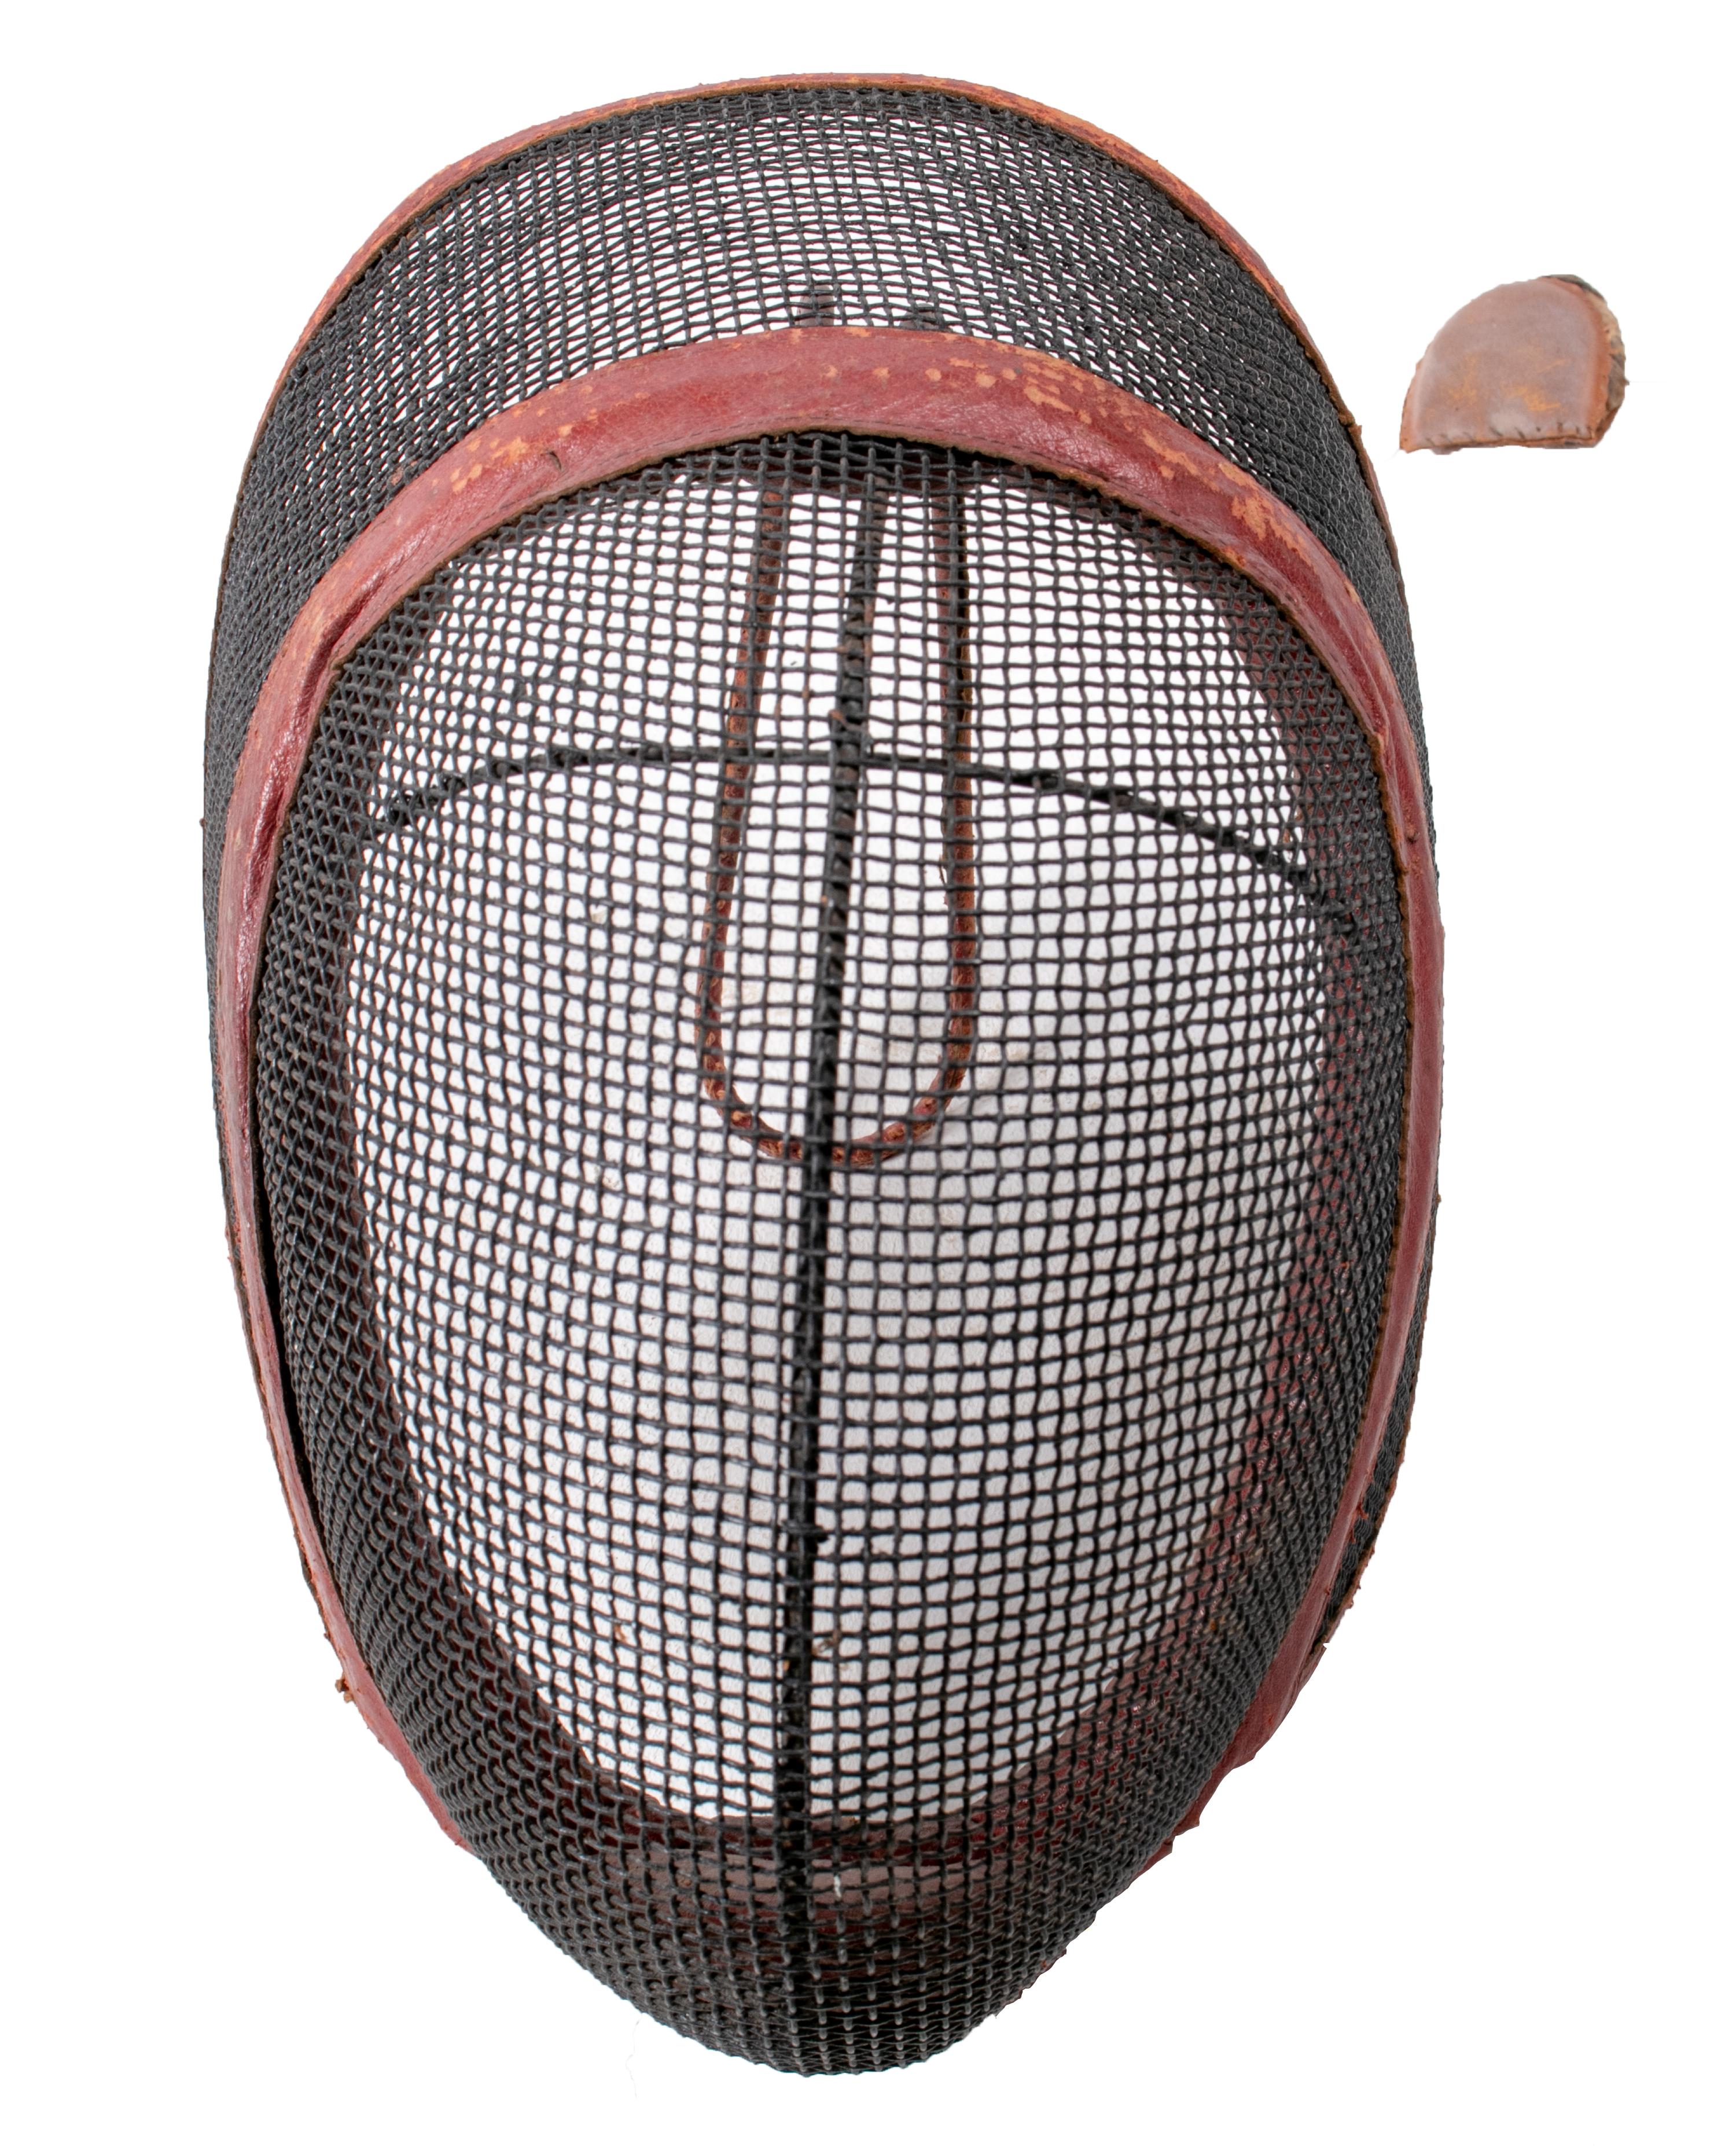 19th Century Pair of Antique Iron and Leather Fencing Mesh Mask 2